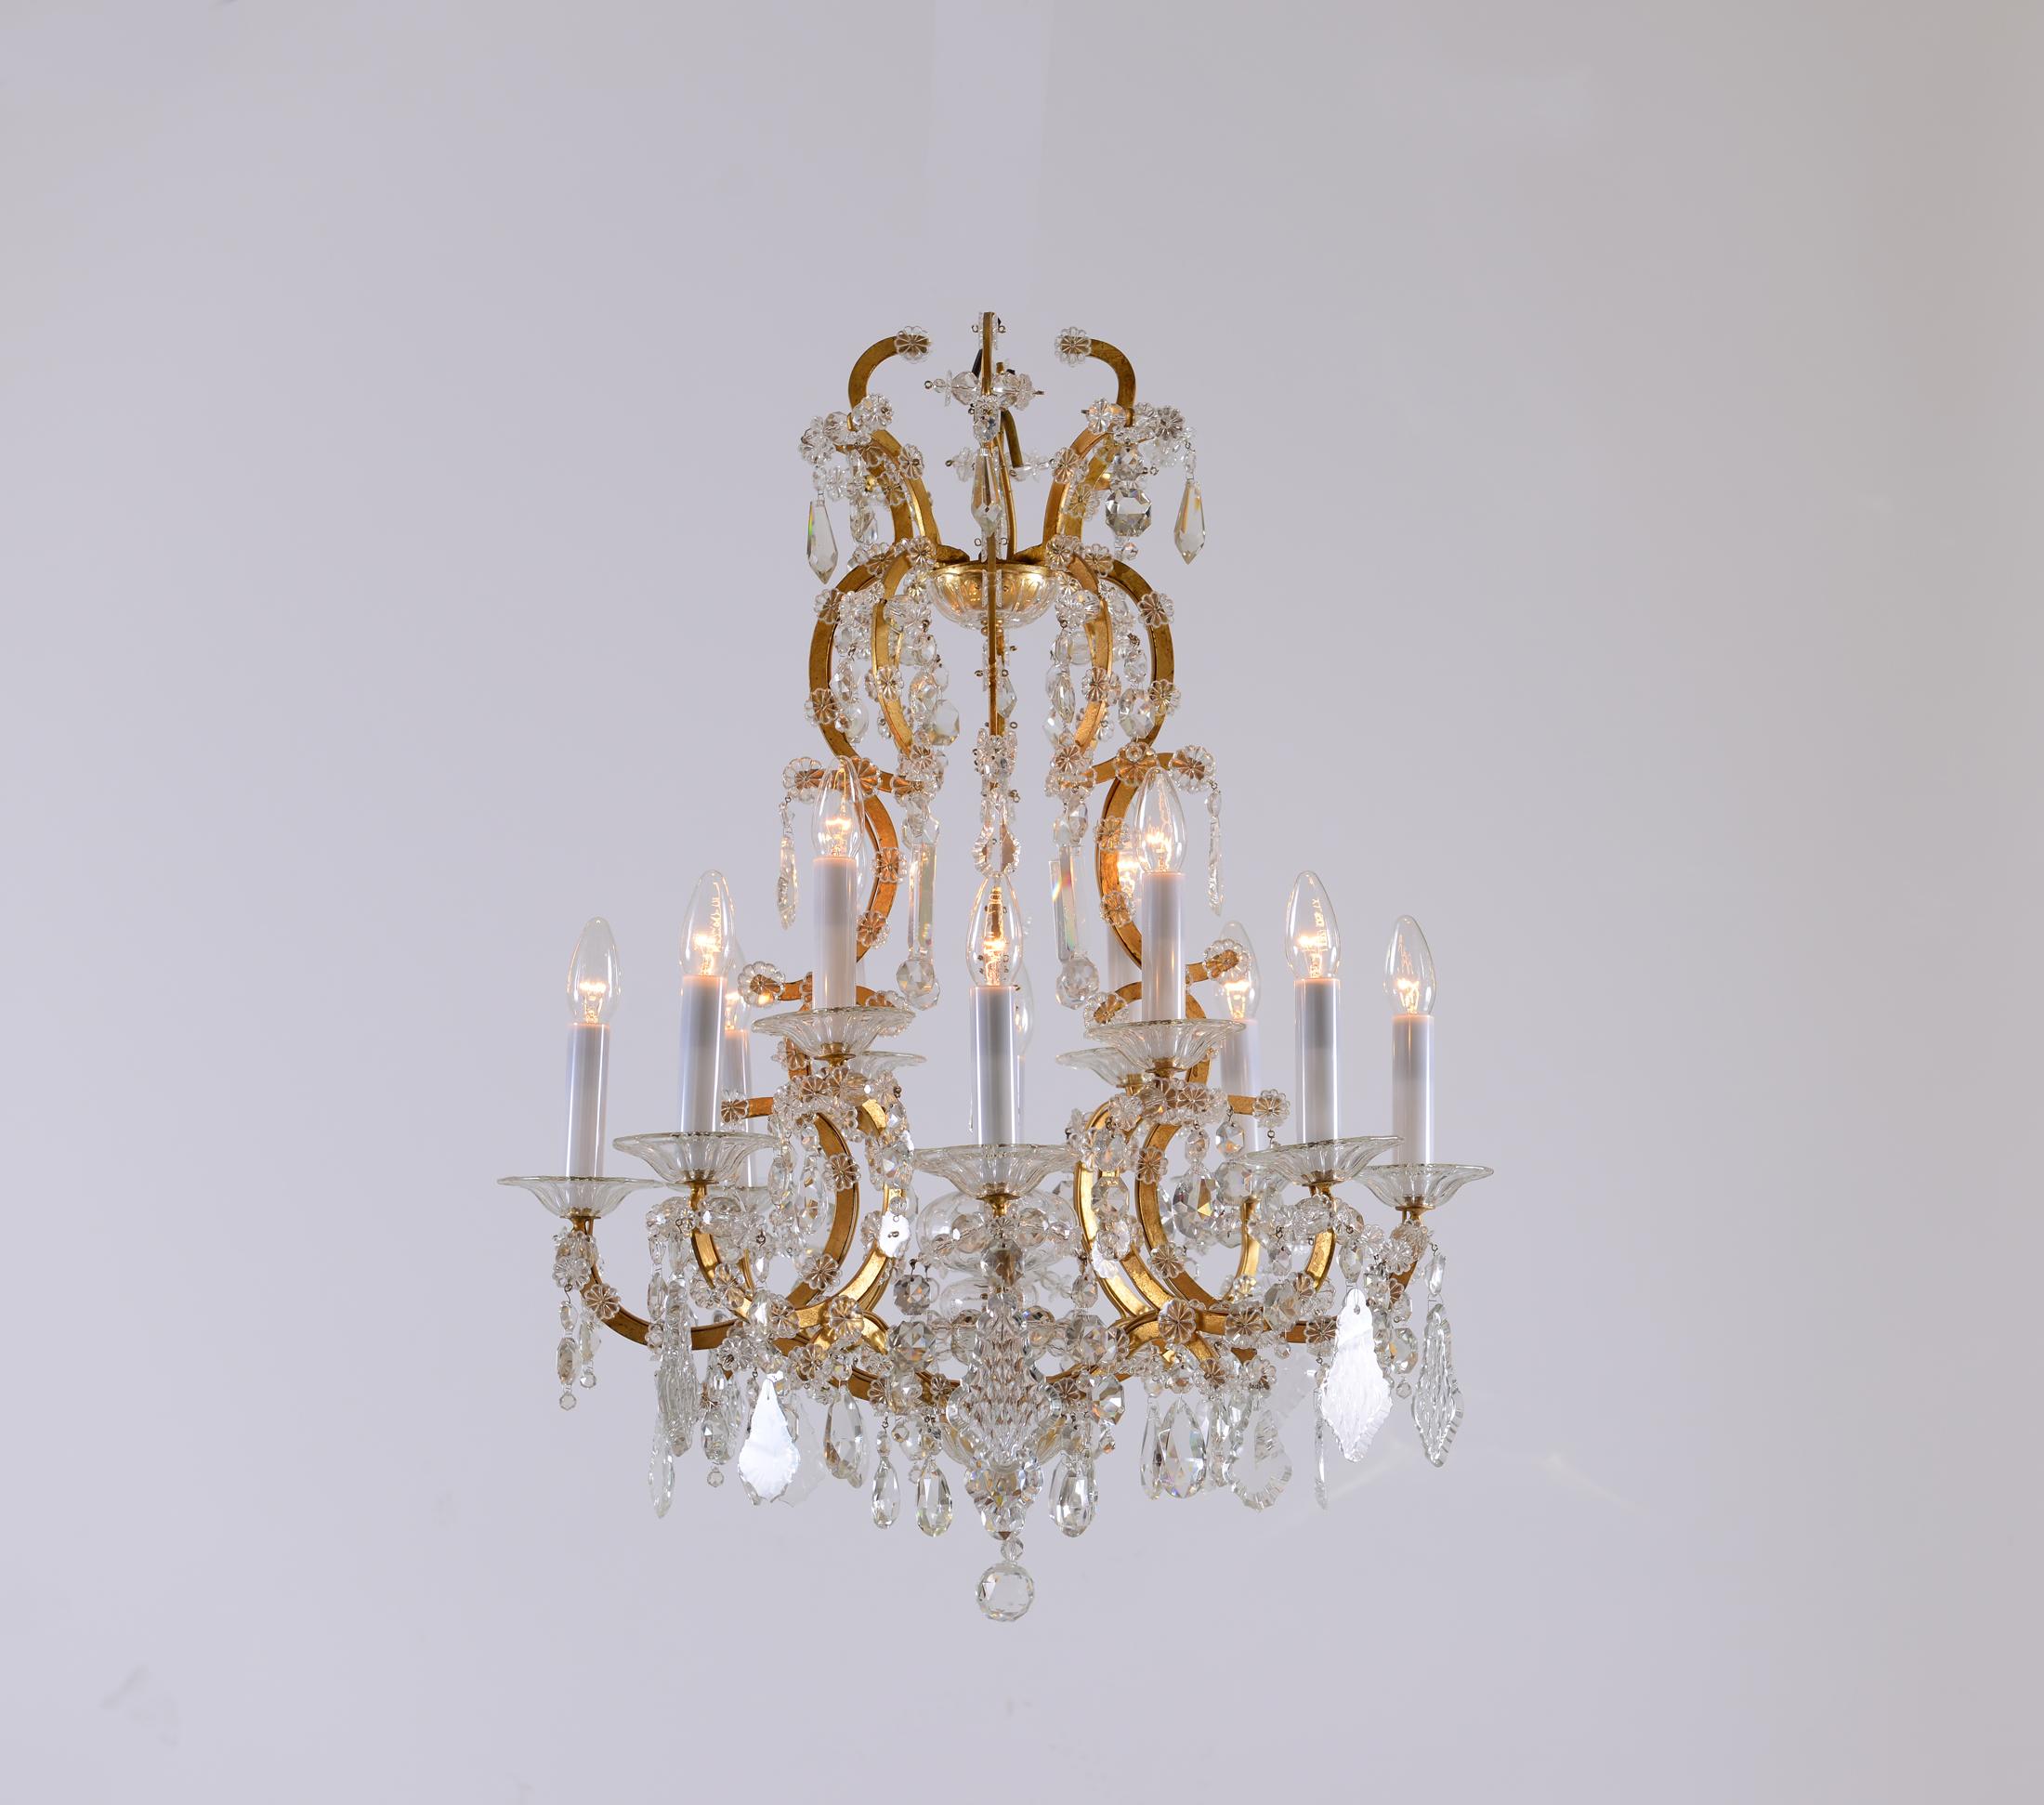 Baroque Revival Original Maria Theresien Style Crystal Chandelier with Rich Prism Hanging For Sale